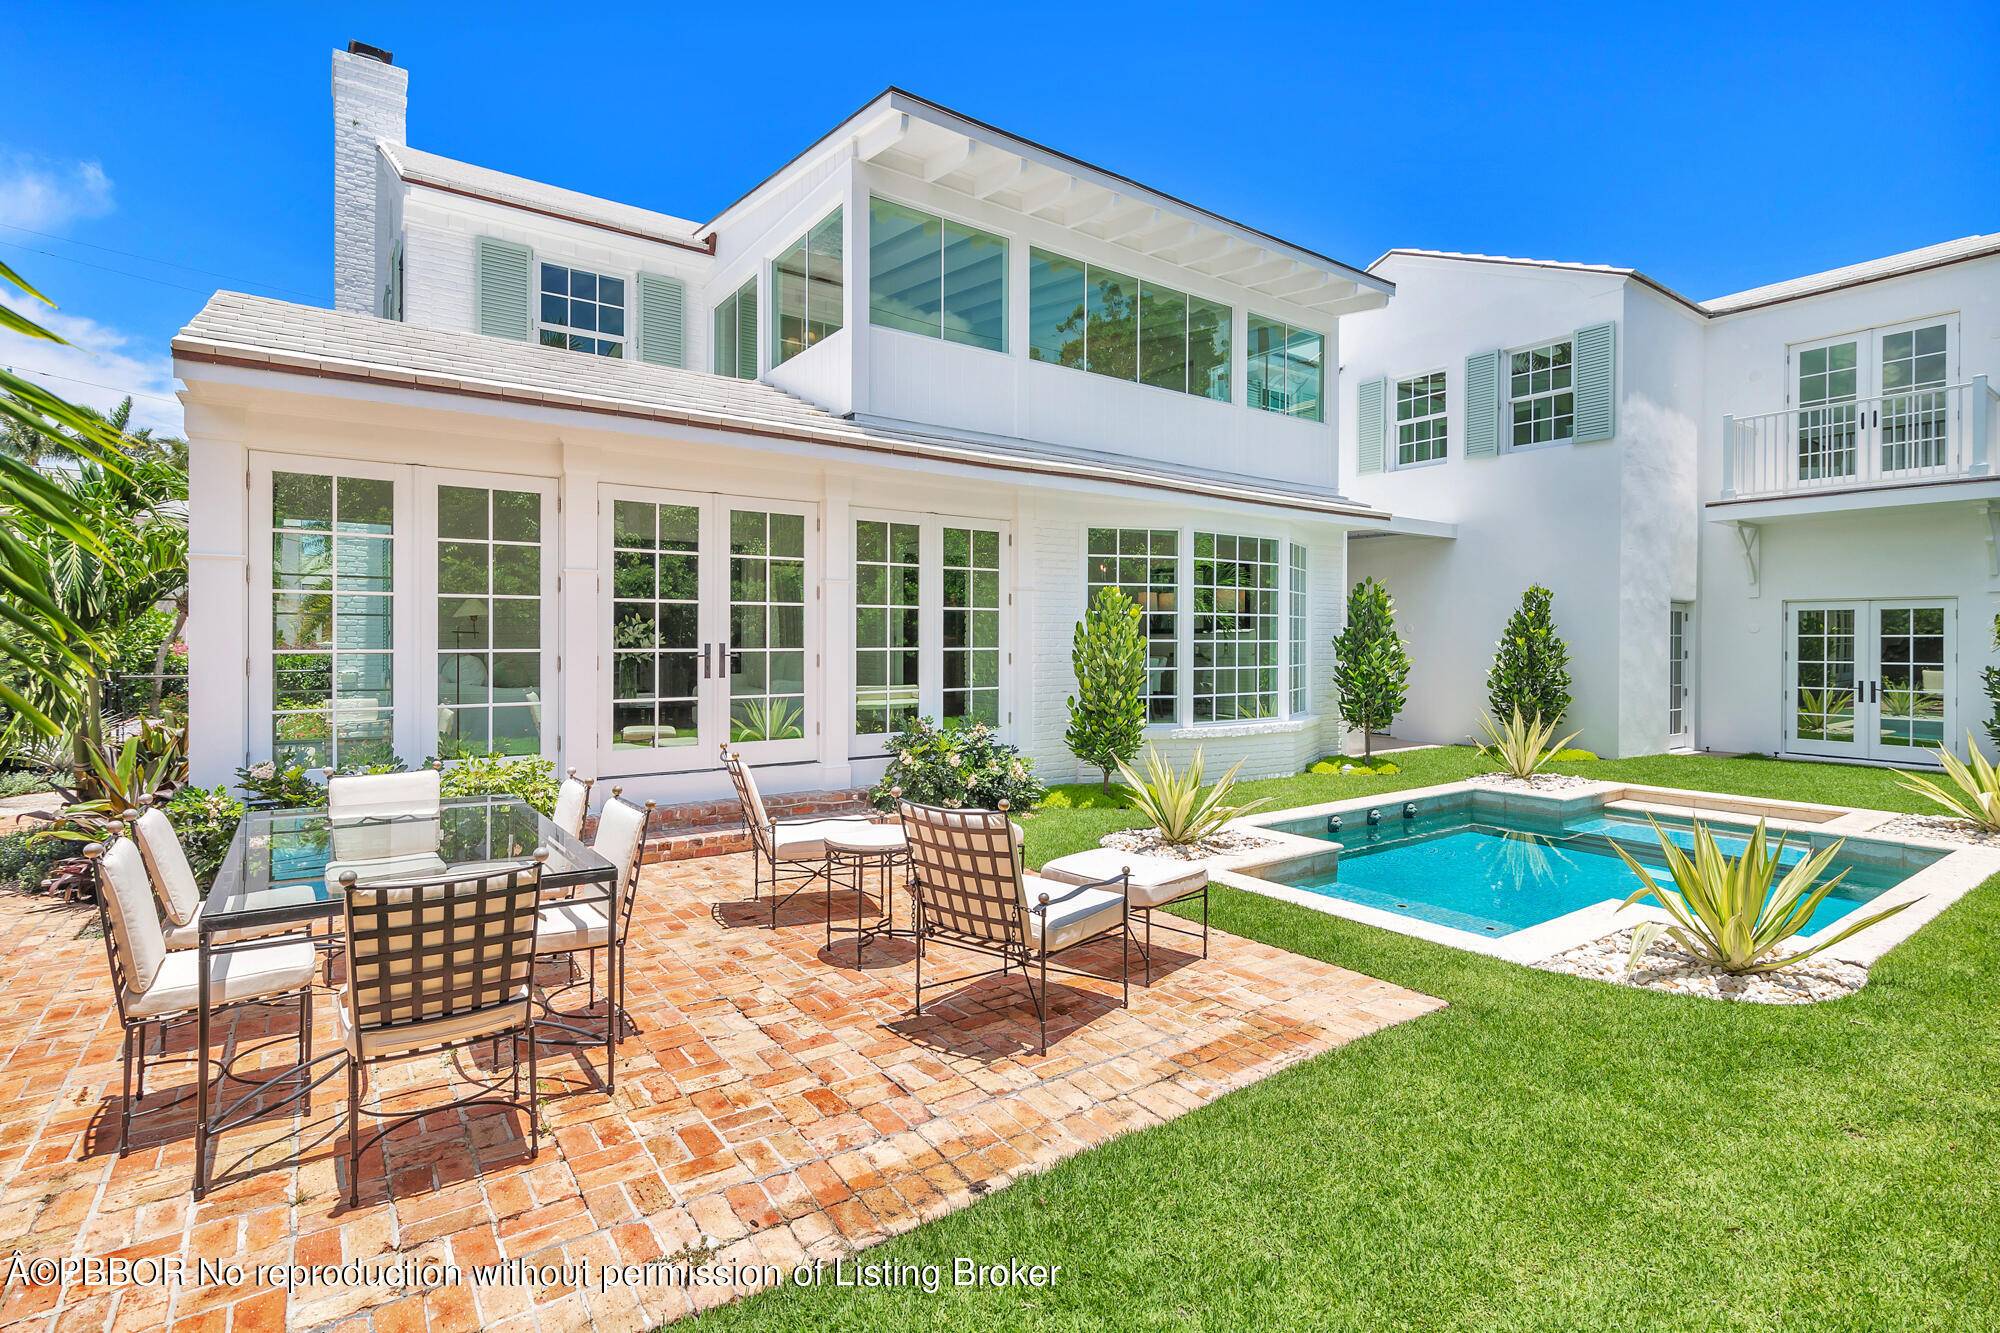 The ideal Seasonal rental in town, located at 236 Pendleton Avenue, is an exquisite Palm Beach Island home offering the perfect blend of timeless elegance and modern living.